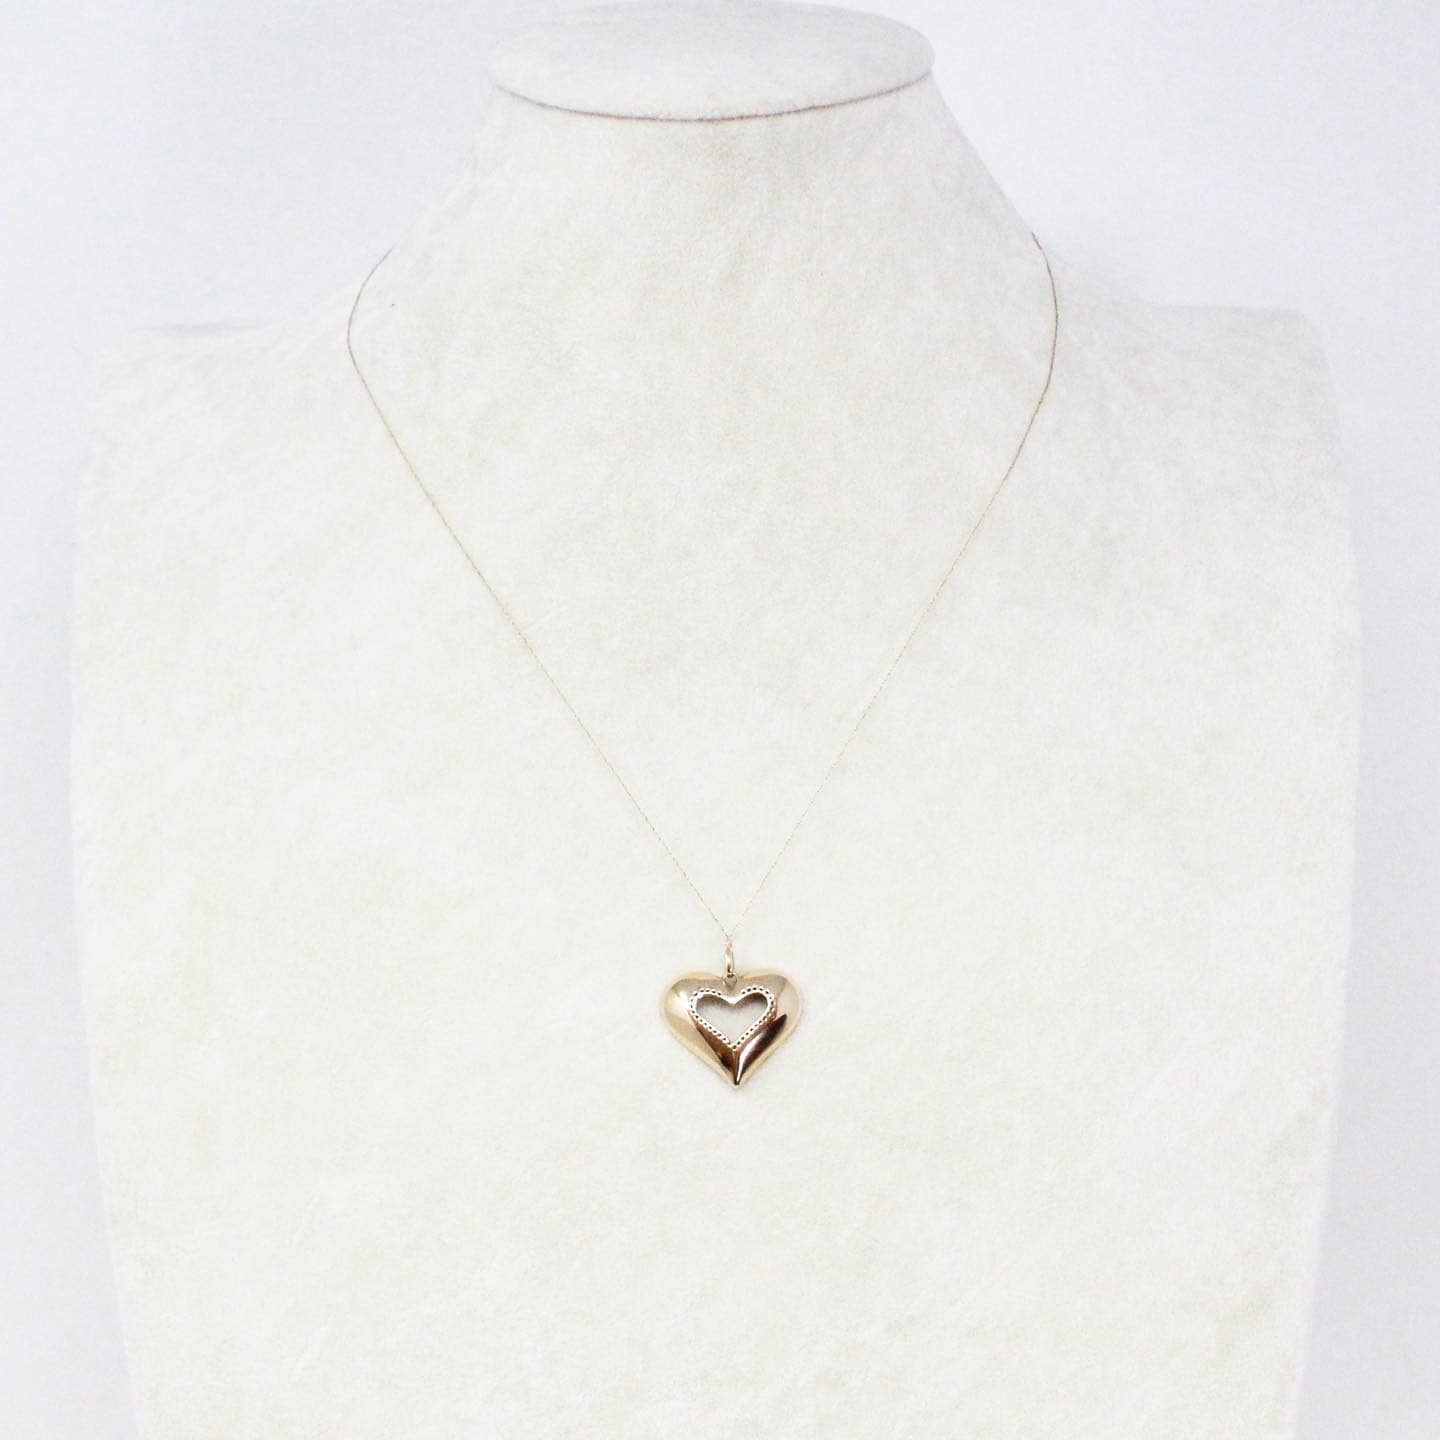 FINE JEWELRY 40300 Gold Chain with Diamond Heart Pendant Necklace 2